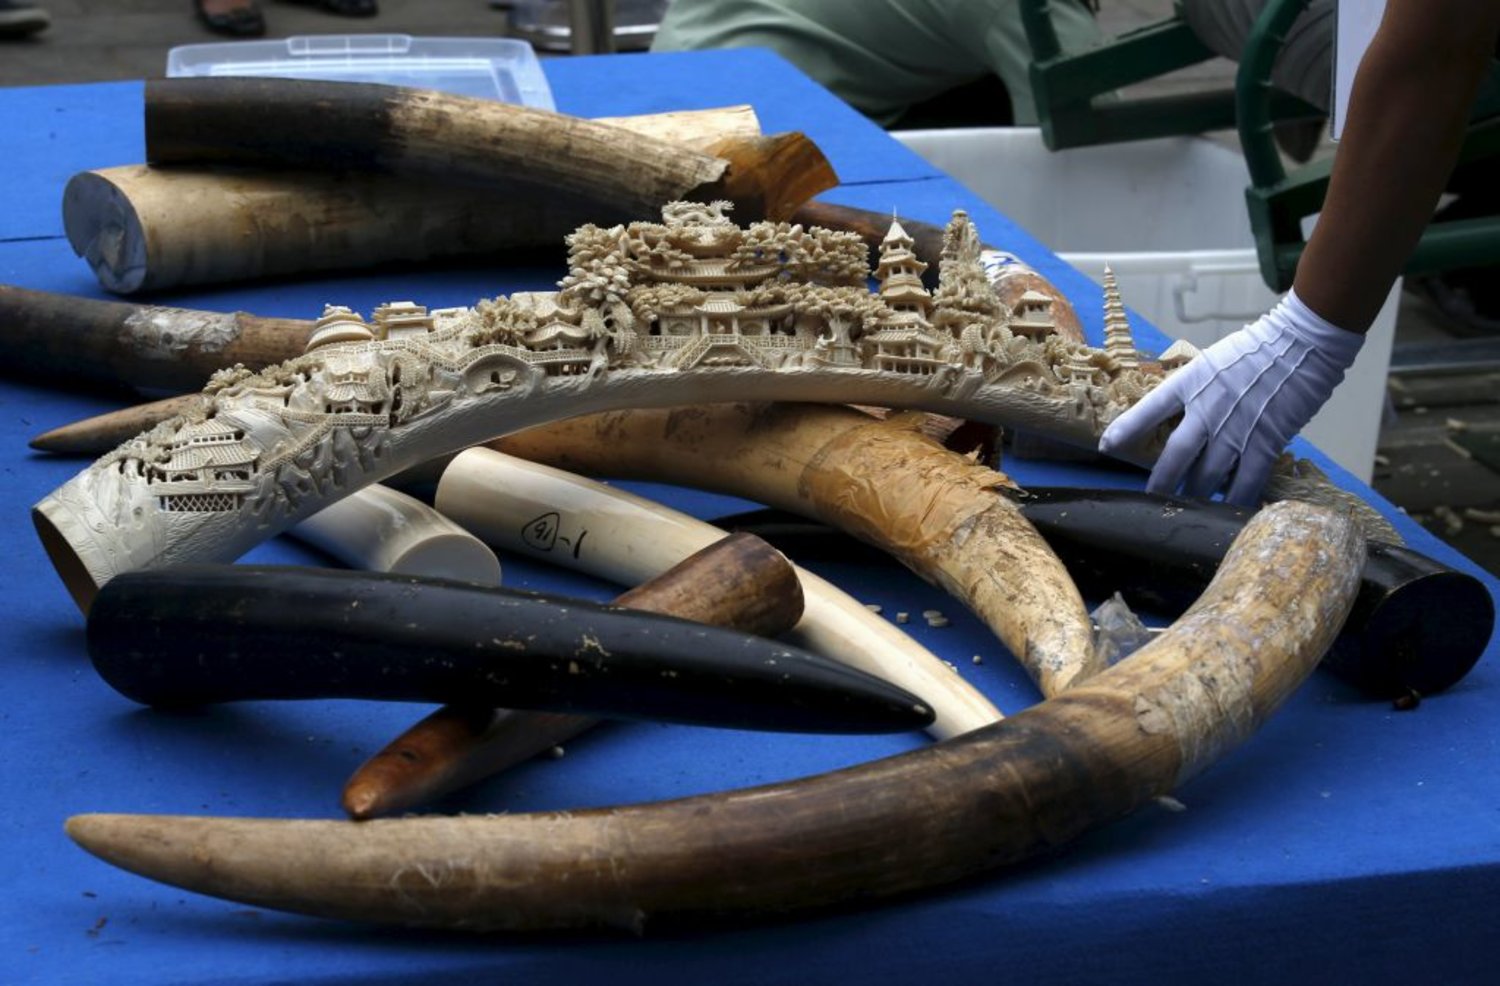 A government official picks up an ivory tusk to crush it at a confiscated ivory destruction ceremony in Beijing, China, May 29, 2015. (Reuters)